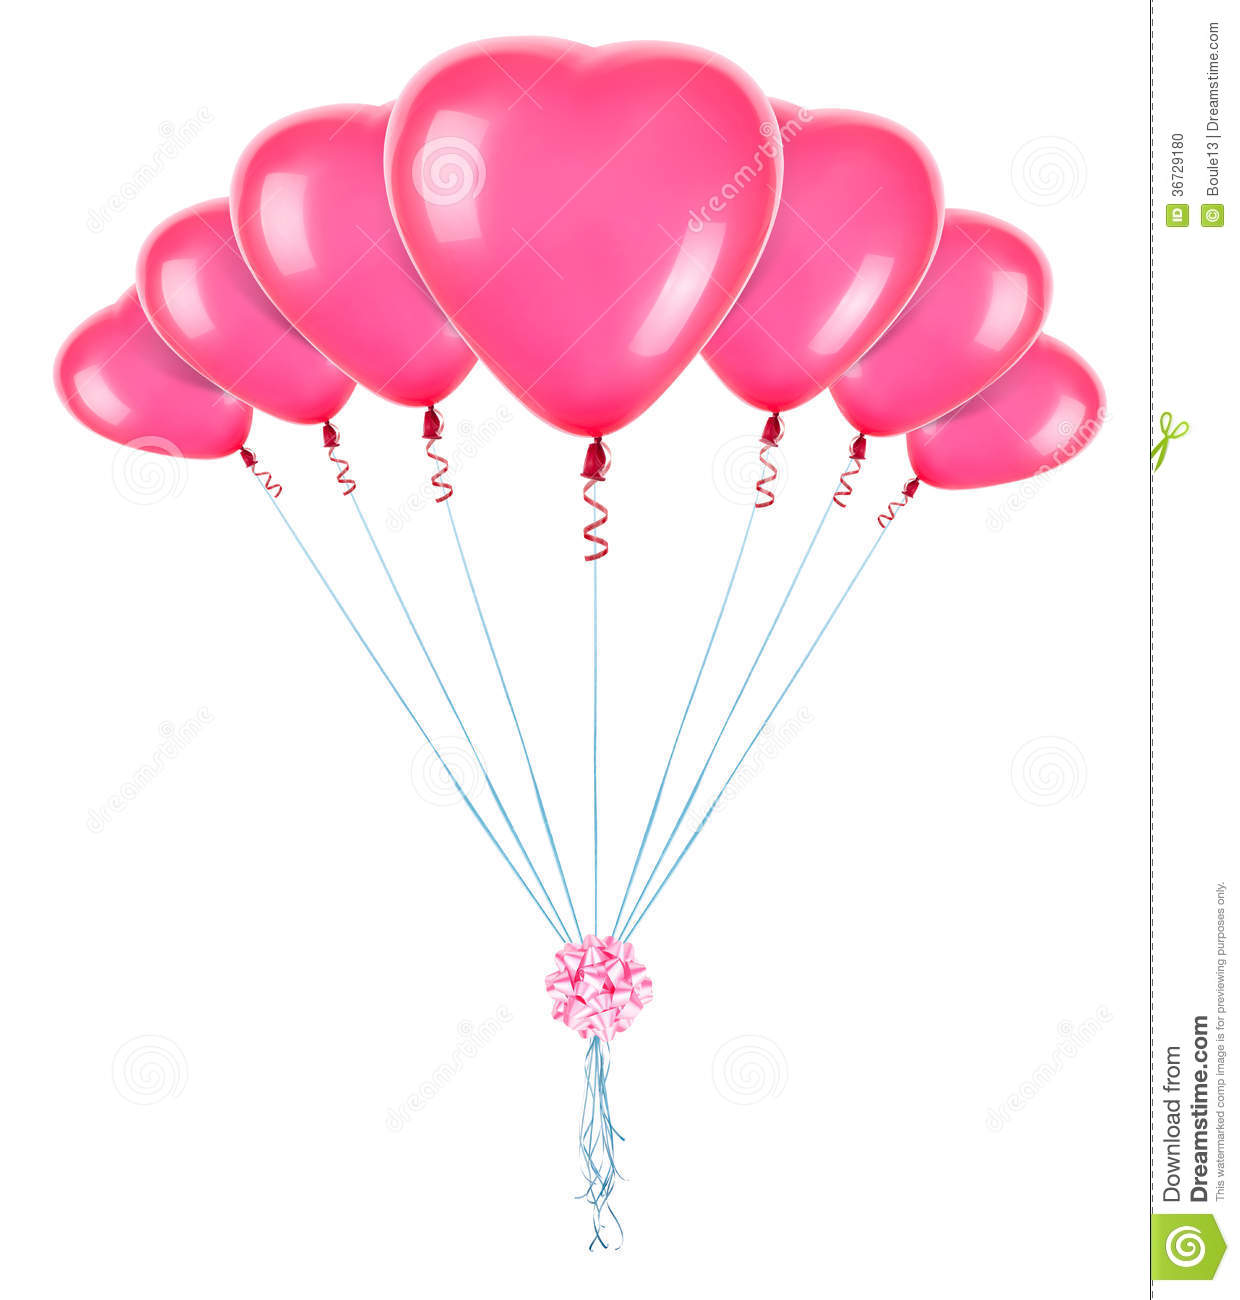 Red Heart Balloons Stock Photo   Image  36729180